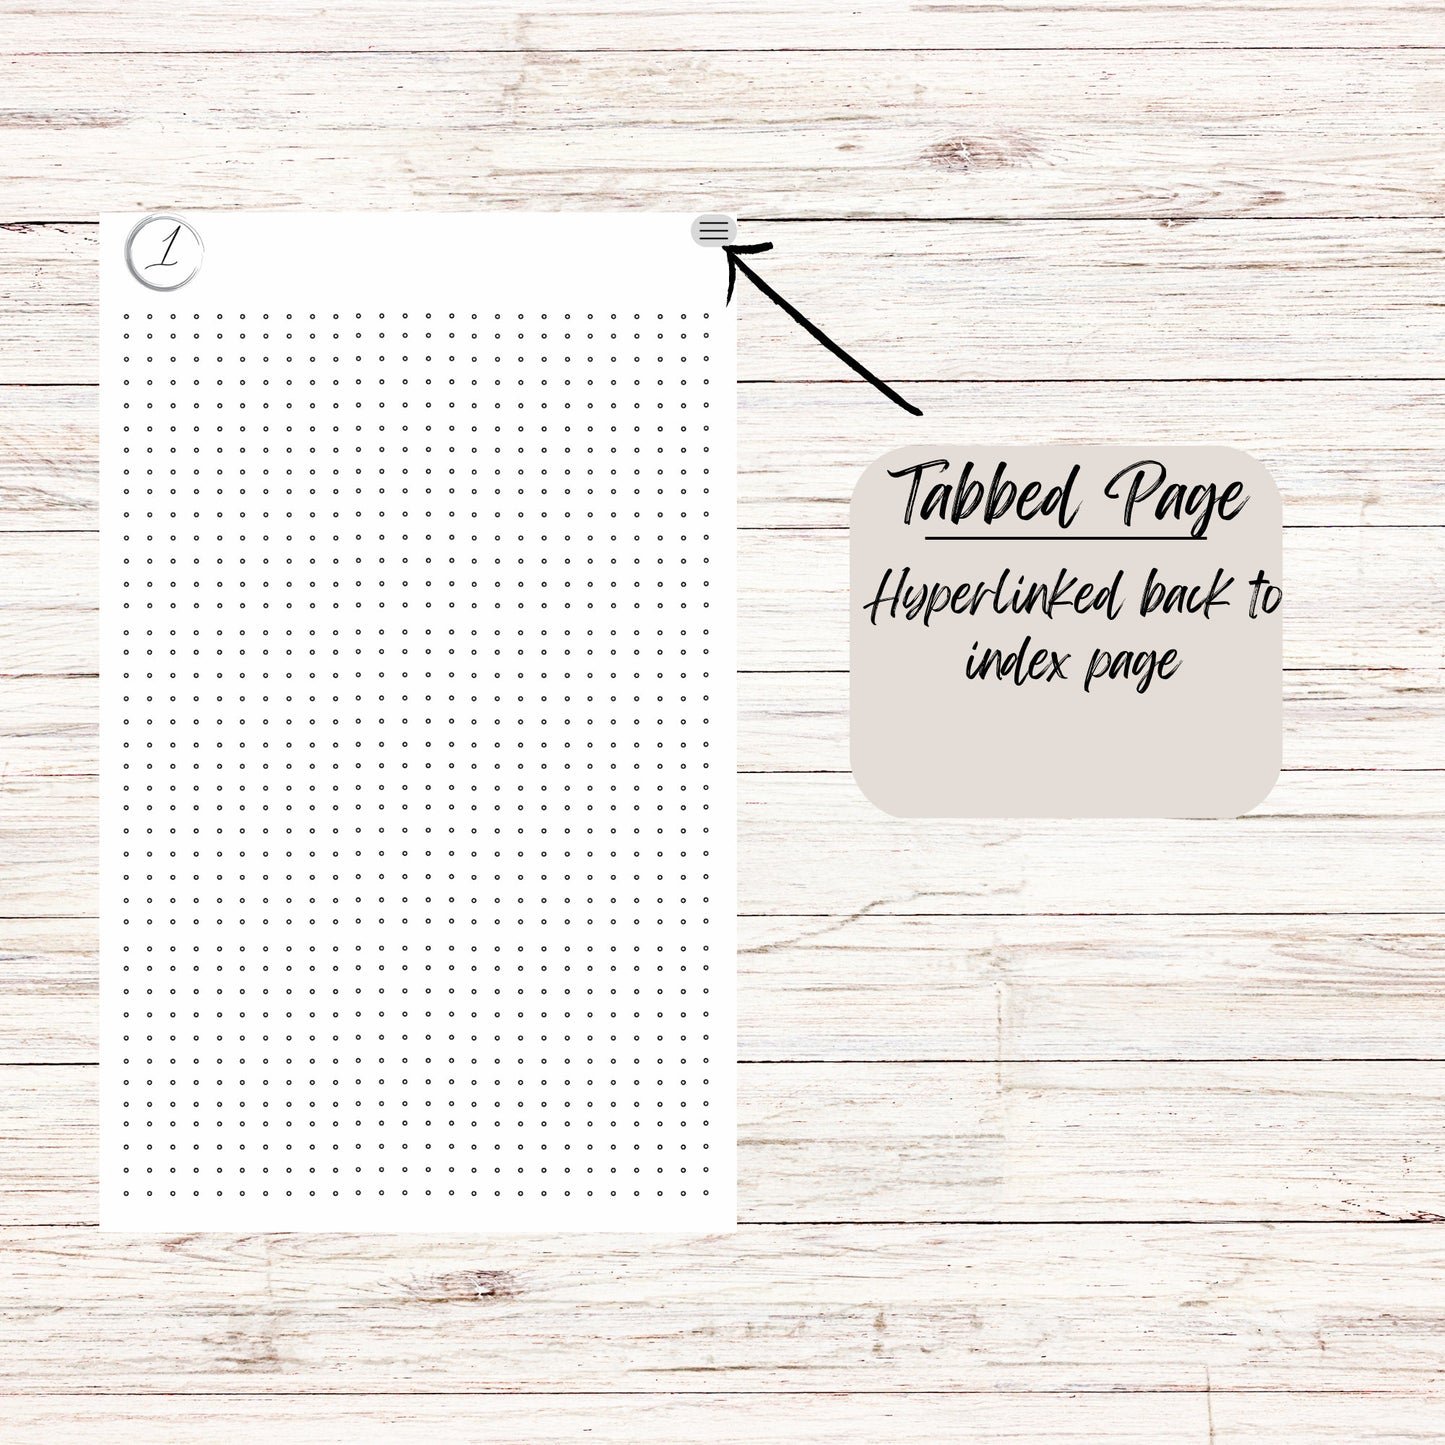 DIGITAL Dot Grid NOTEBOOK || hyperlinked notebook with tabs || GoodNotes